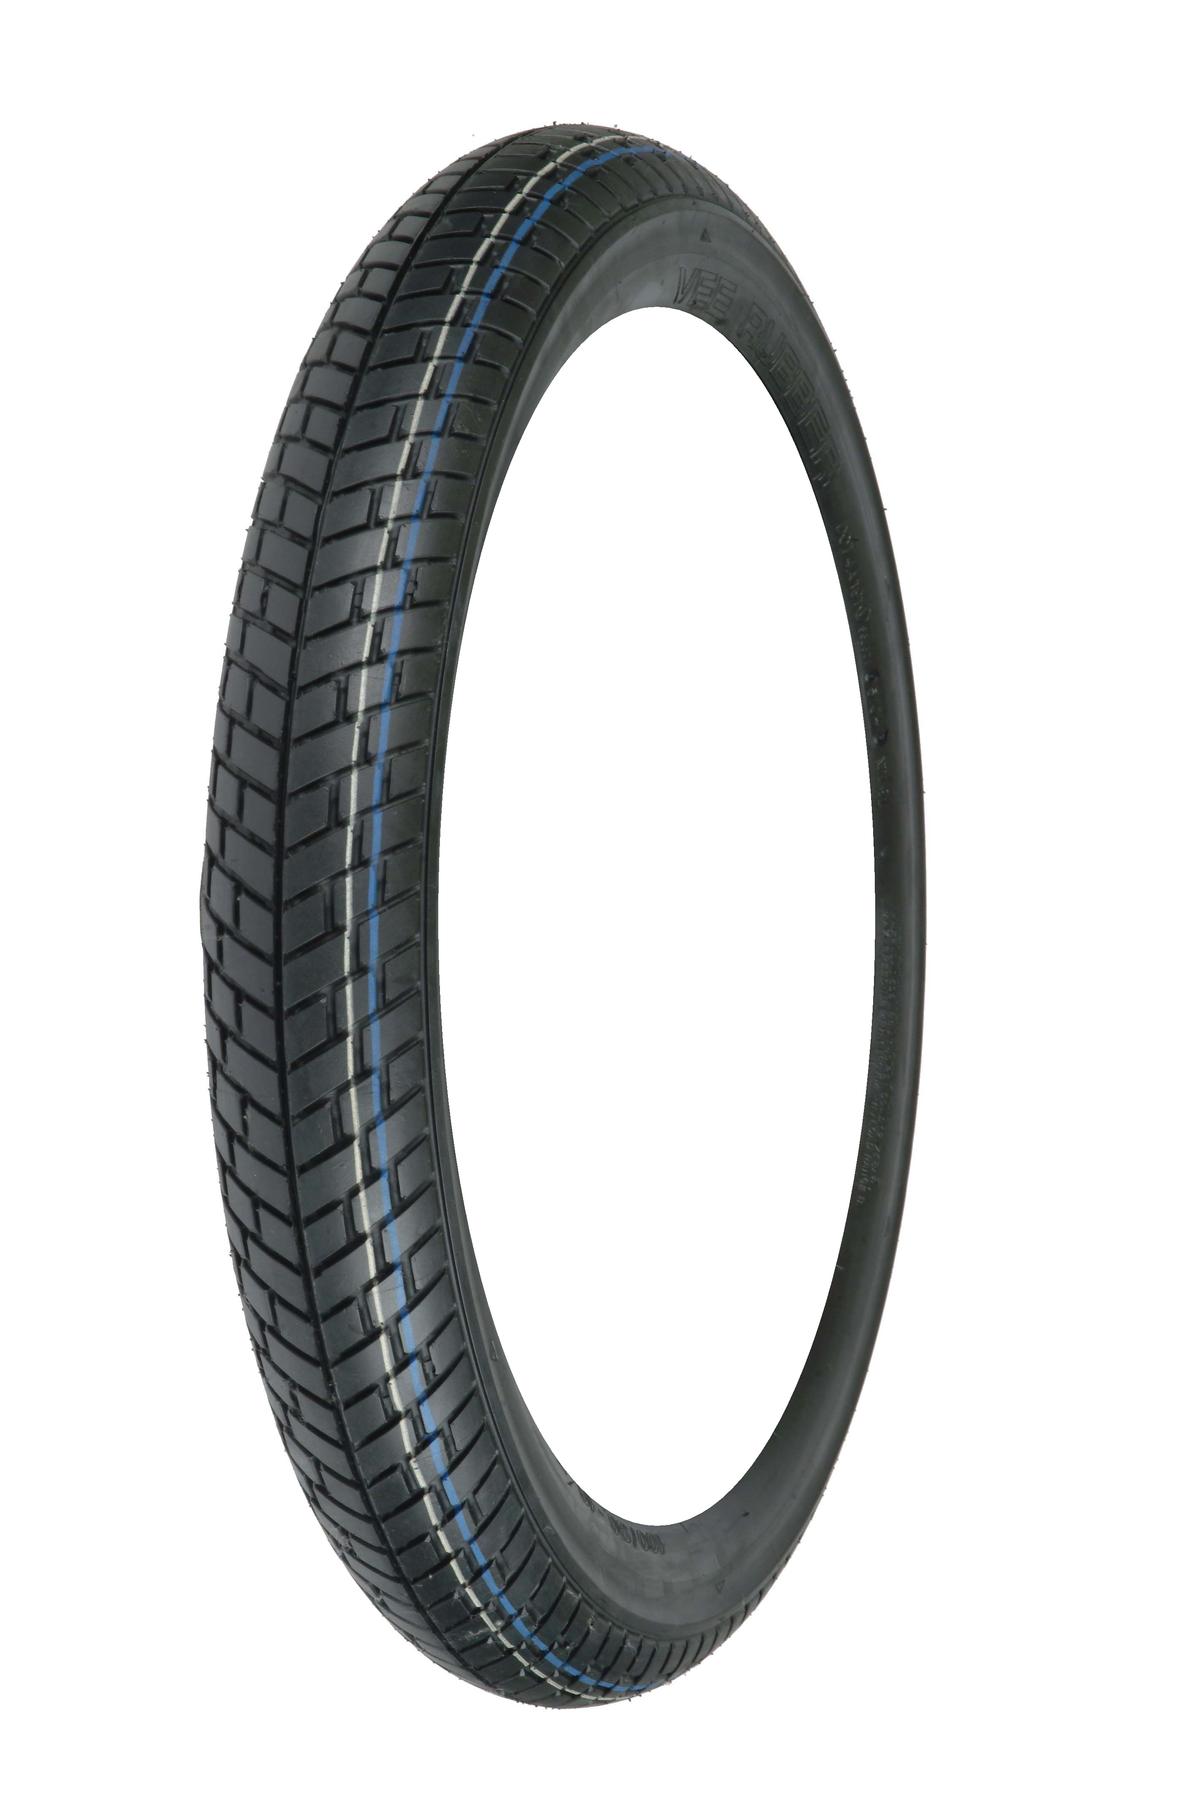 NEW VEE RUBBER 90/90-19 FRONT TIRE TYRE MOTORCYCLE ADVANCE 52H 90 90 19 